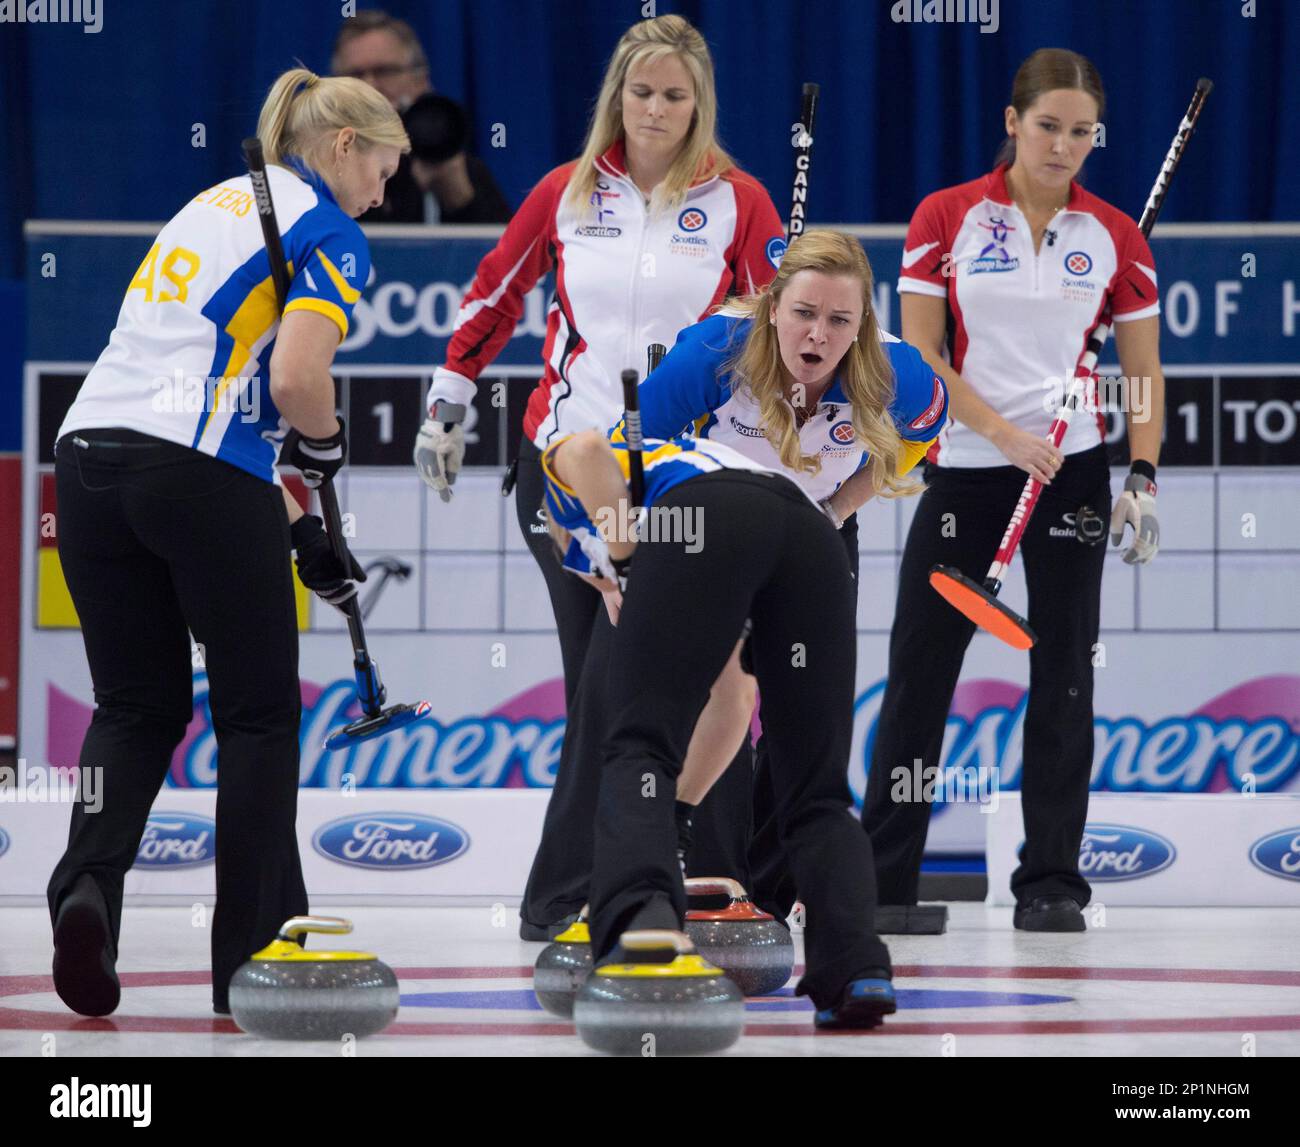 scotties tournament of hearts streaming